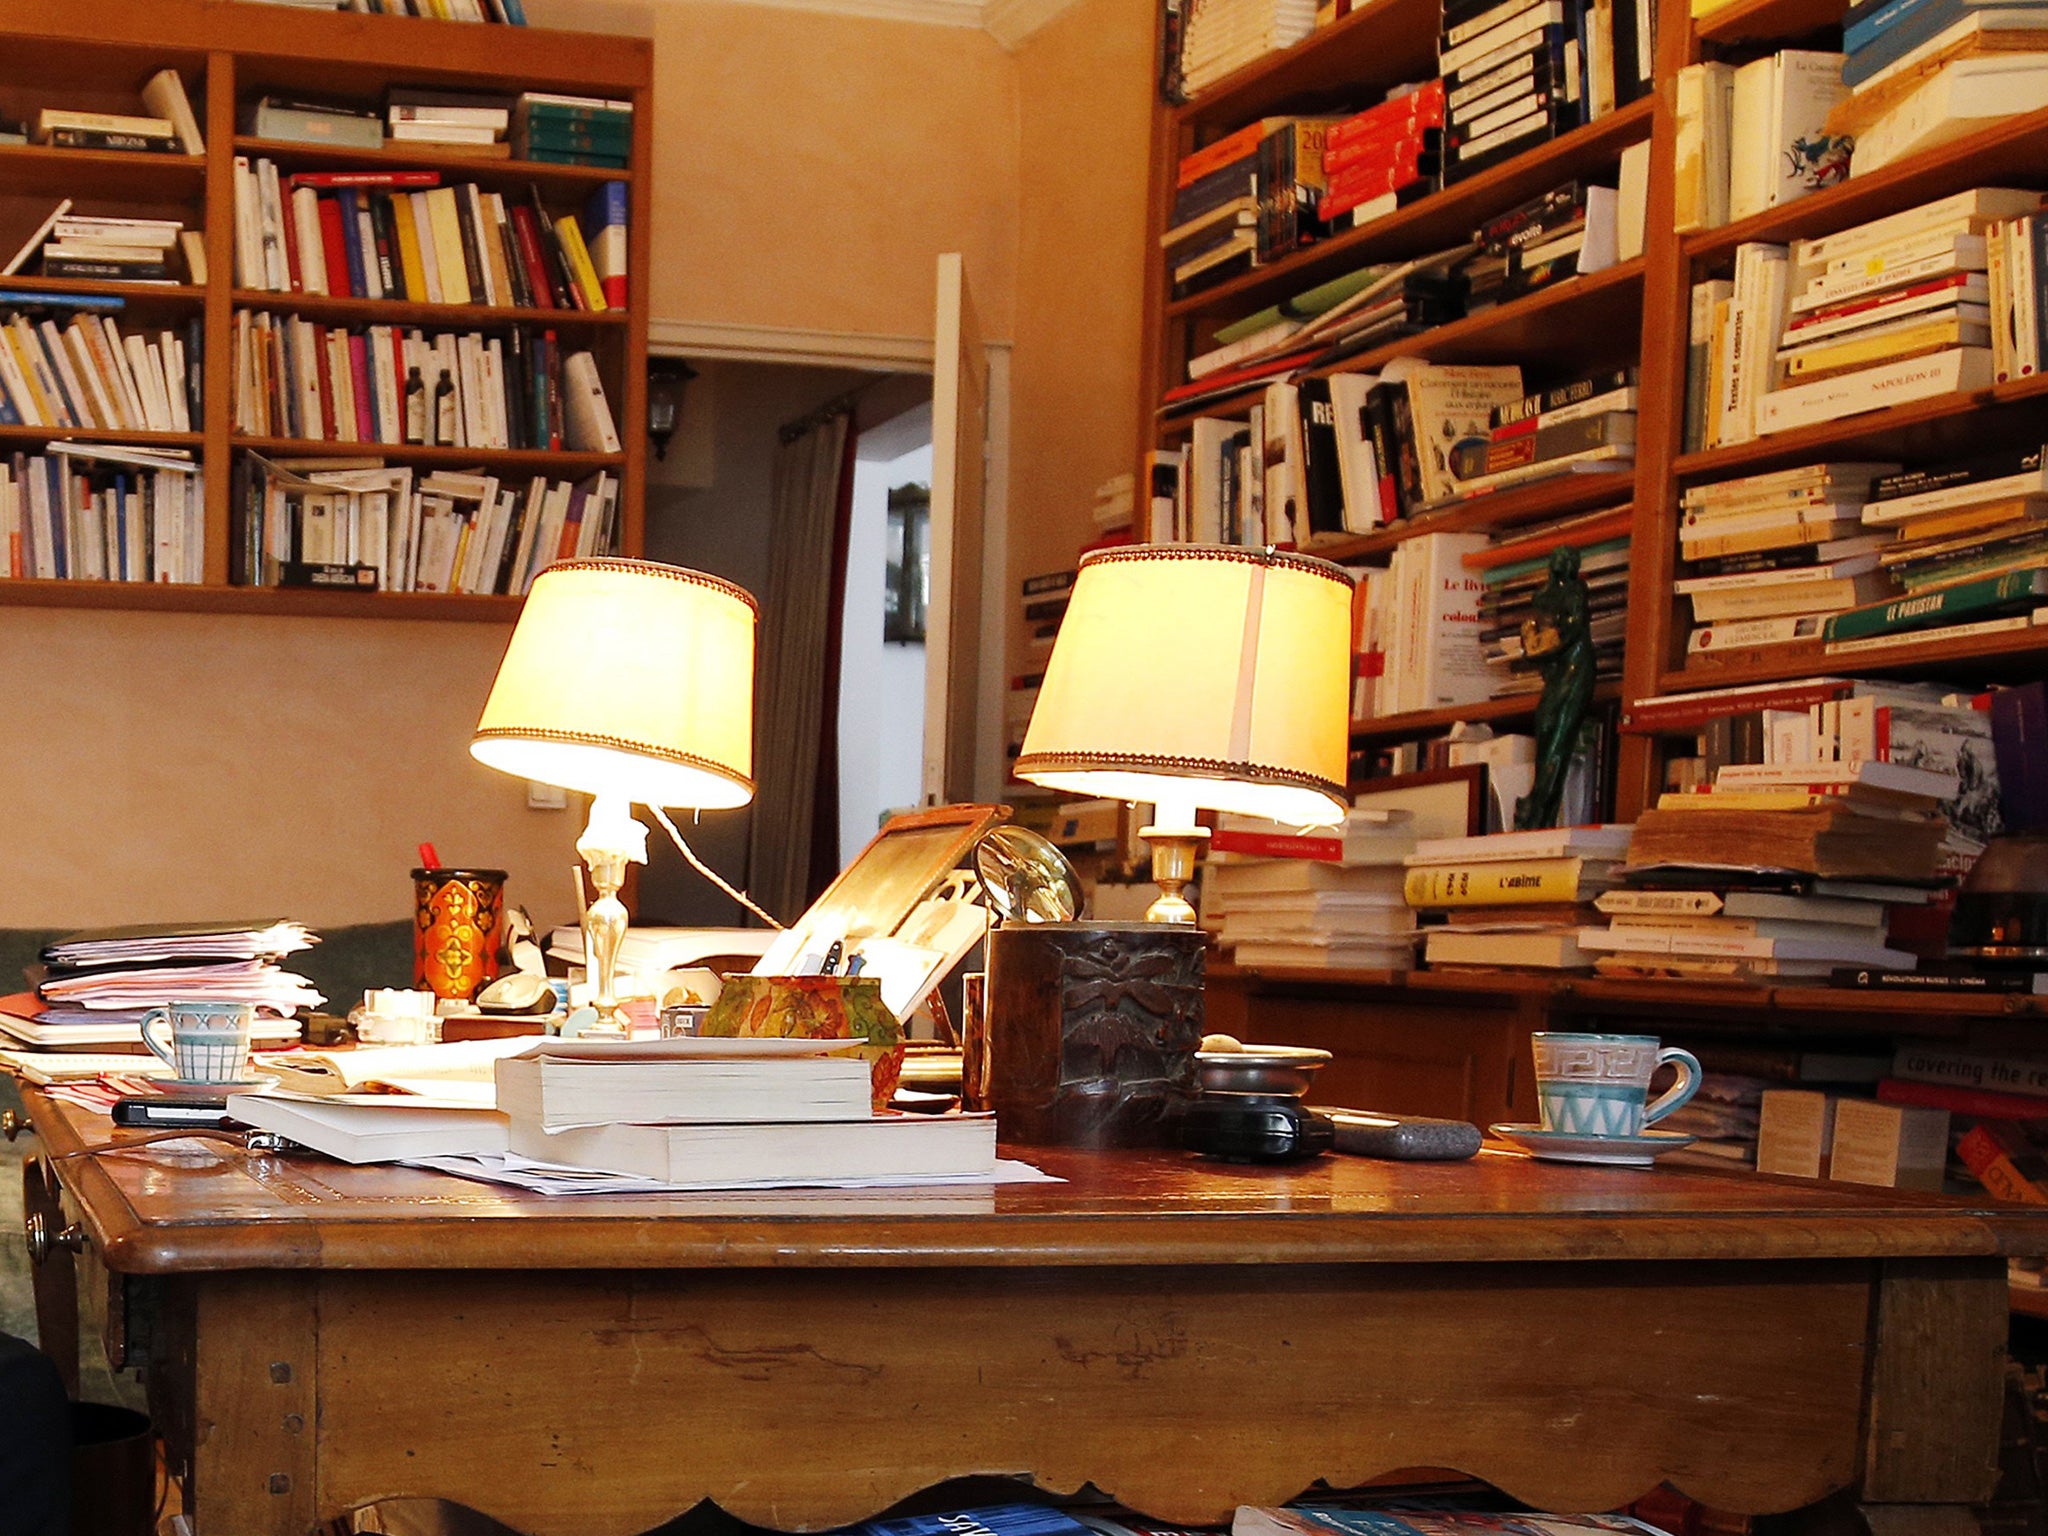 A messy desk could signal a creative mind